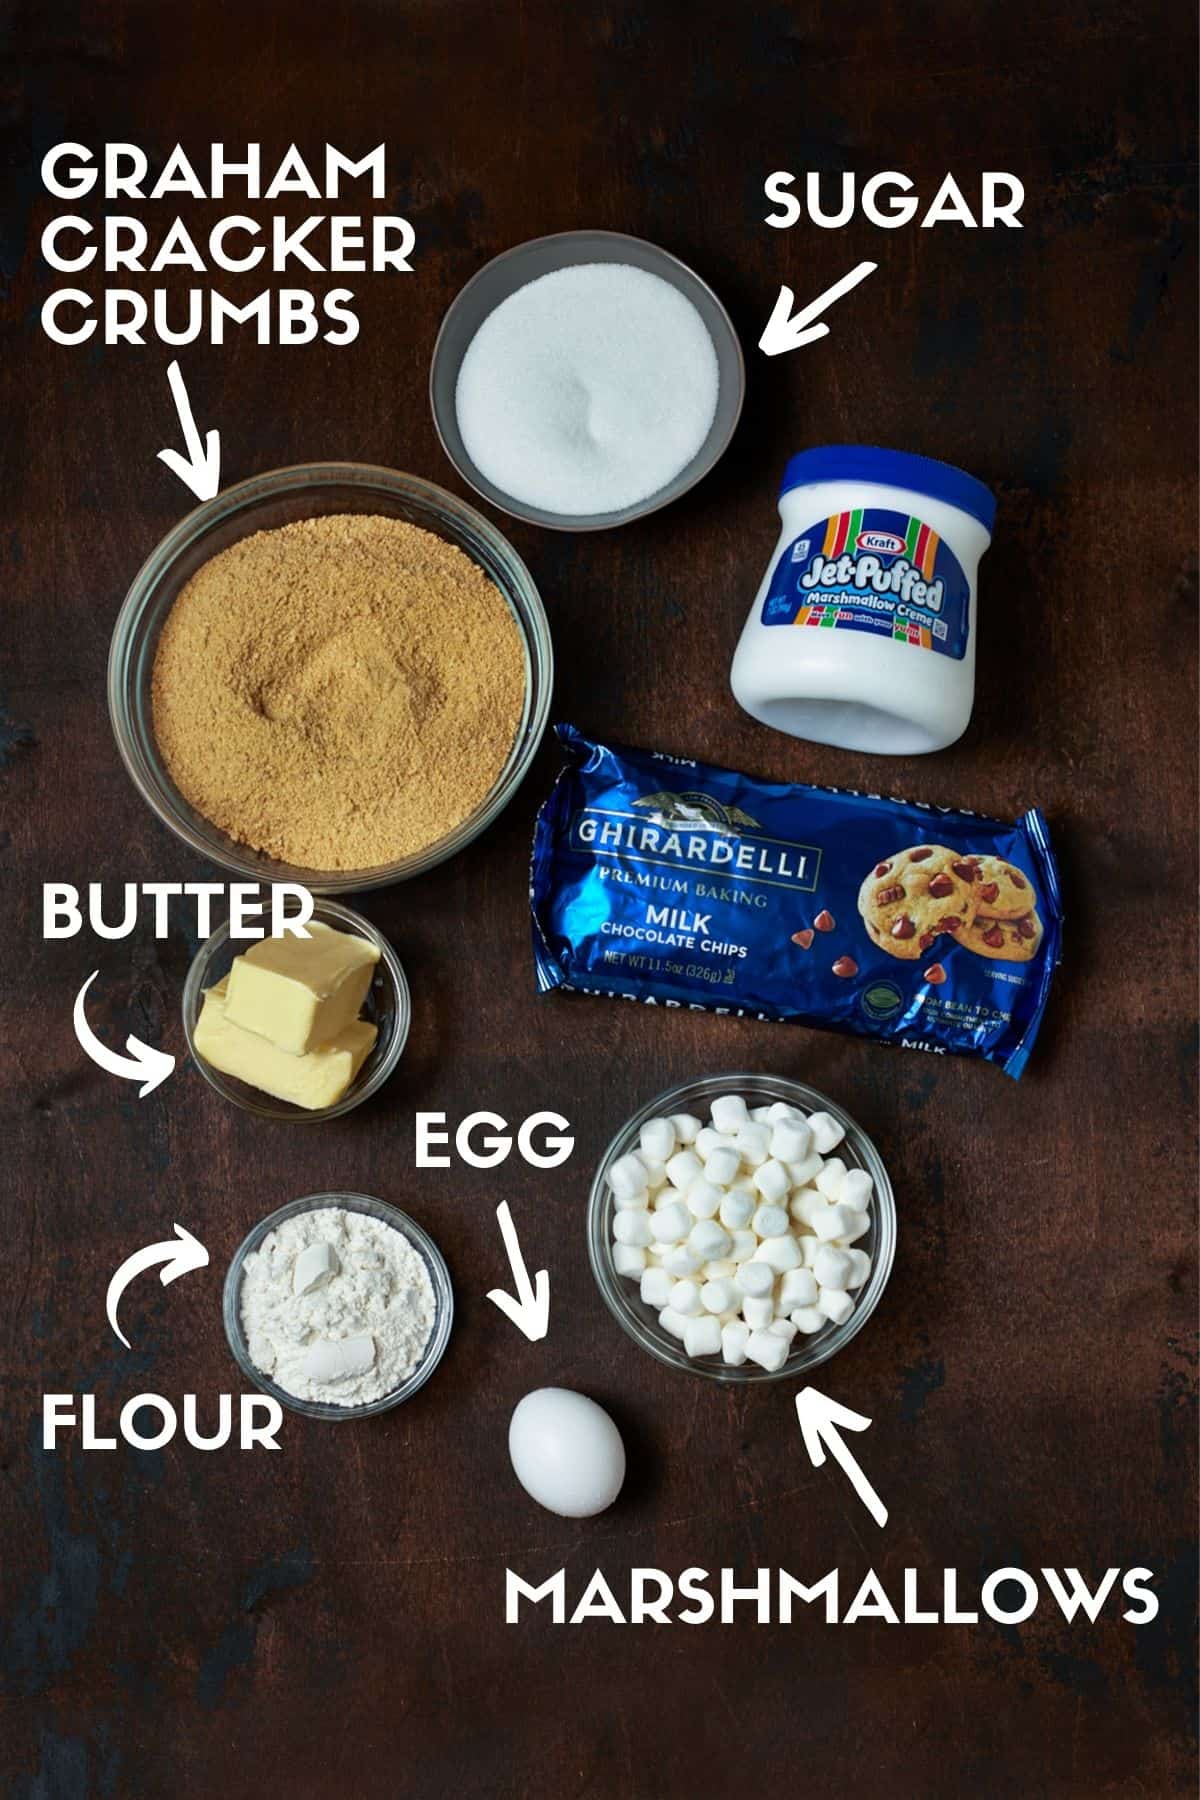 Ingredients for S'mores bars, including chocolate chips, graham cracker crumbs and marshmallow creme. 